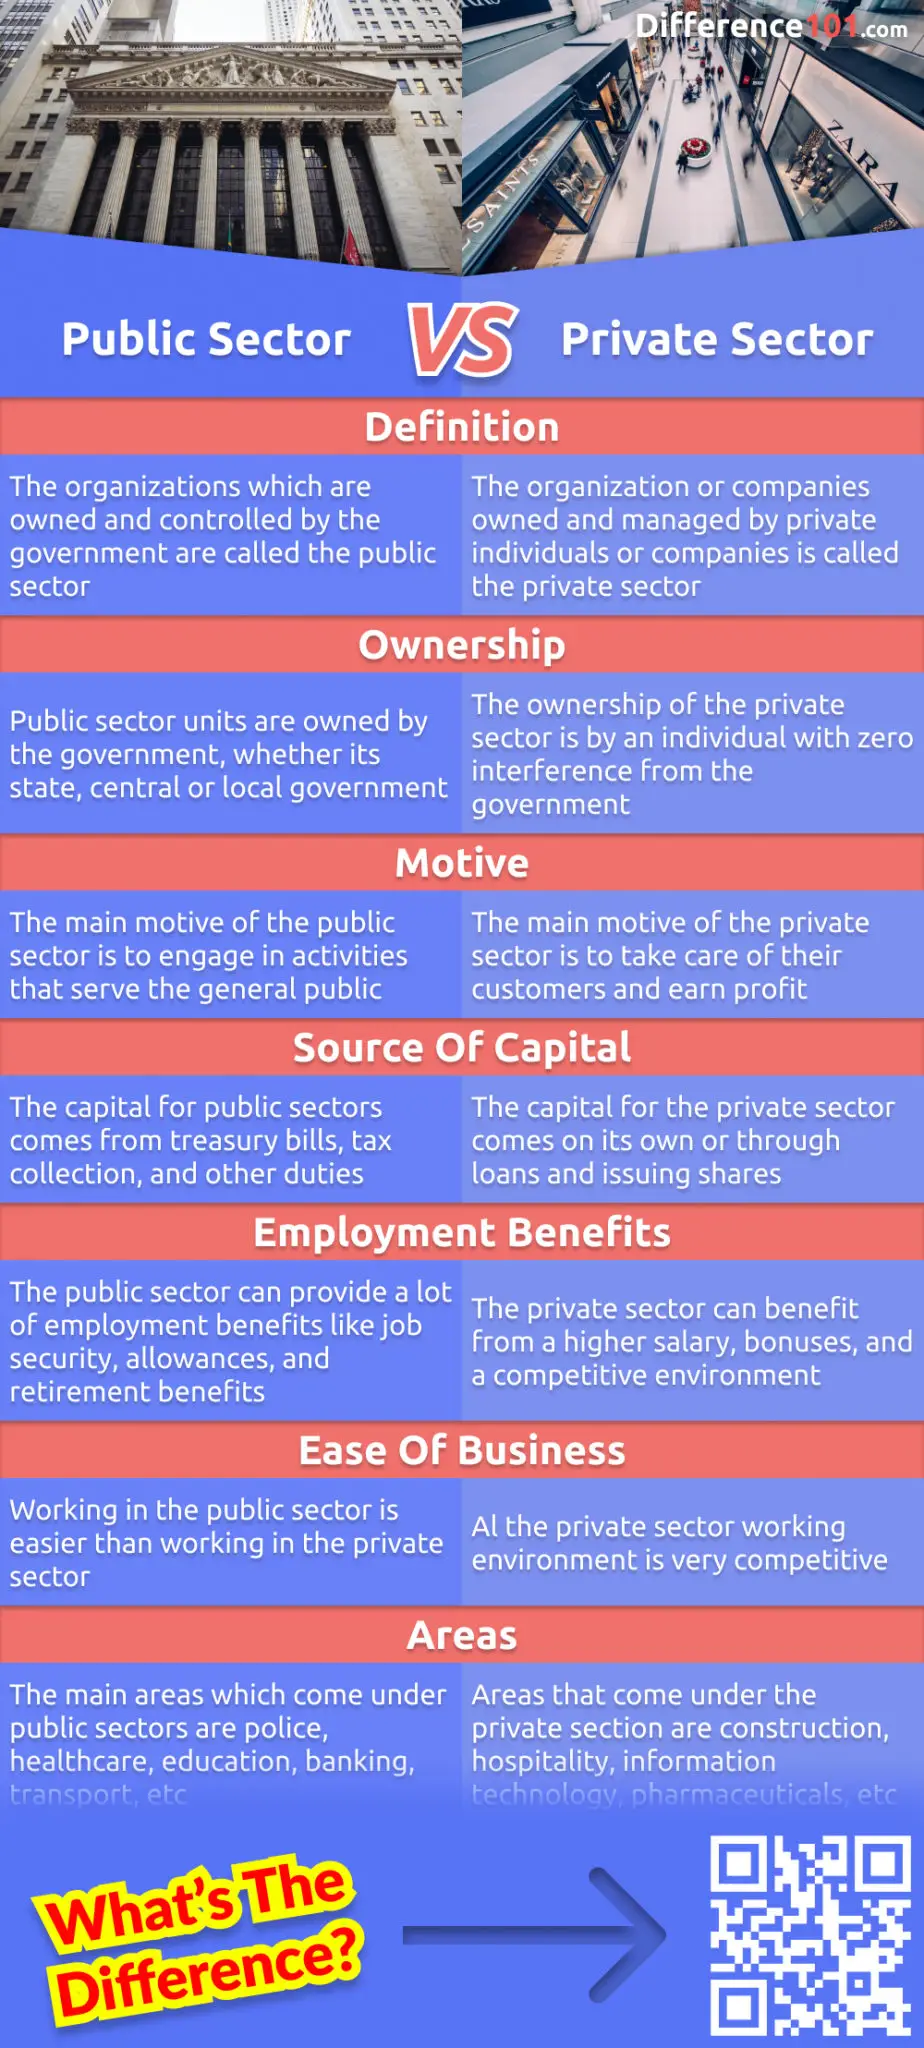 The public sector and private sector are both important components of the economy. Read this article to find out more about the public sector and private sector, and the differences between them.